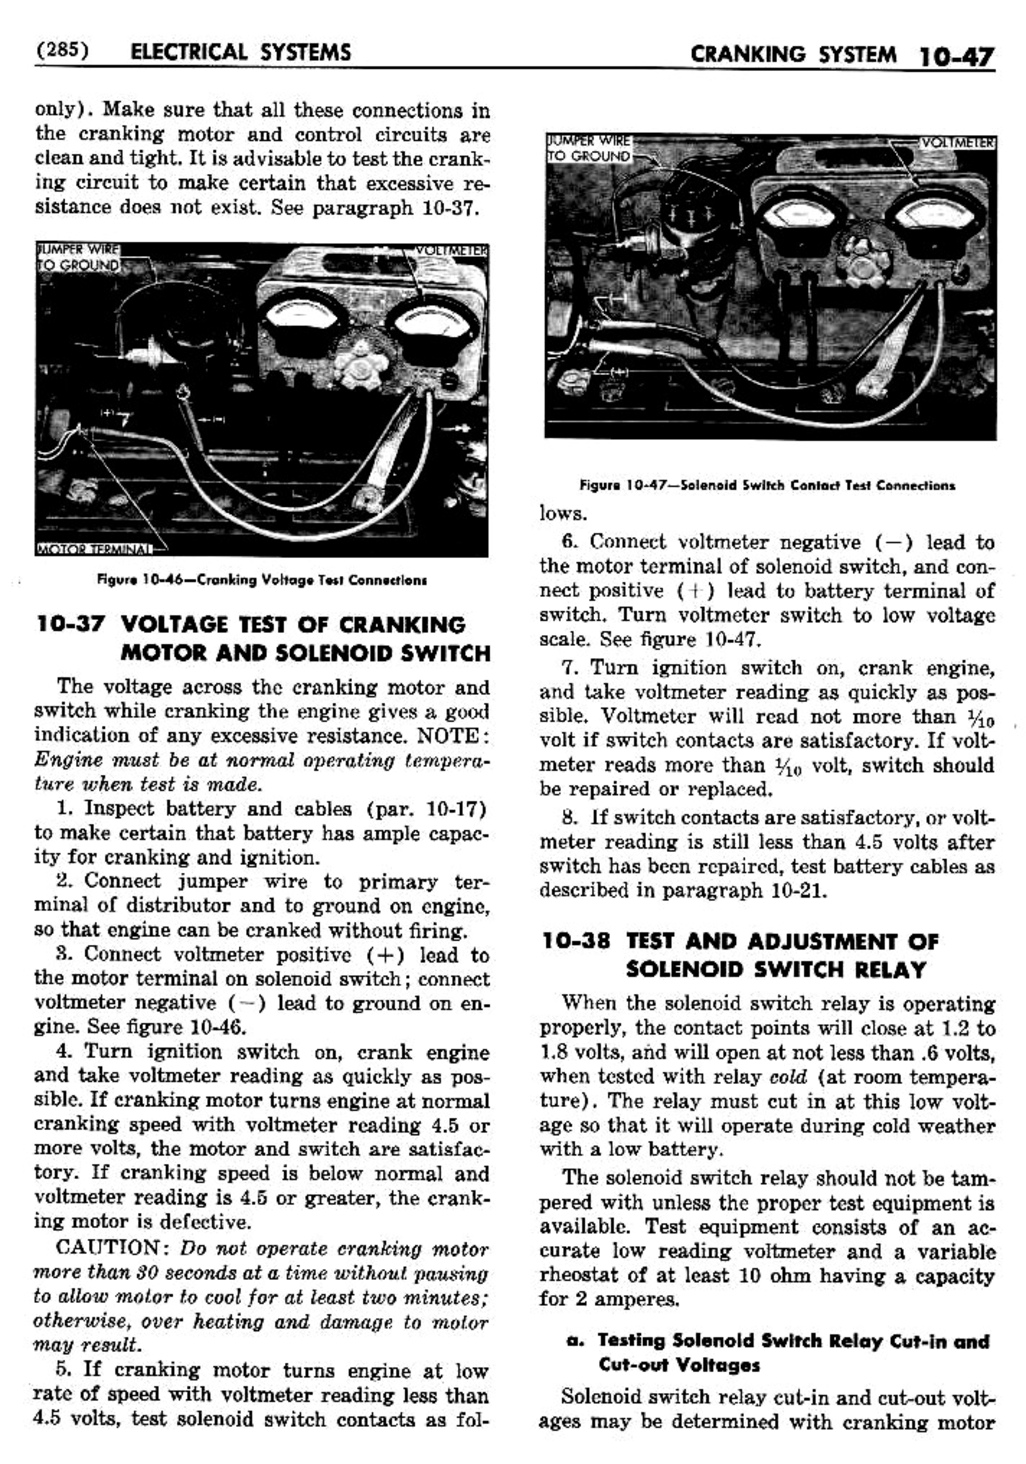 n_11 1950 Buick Shop Manual - Electrical Systems-047-047.jpg